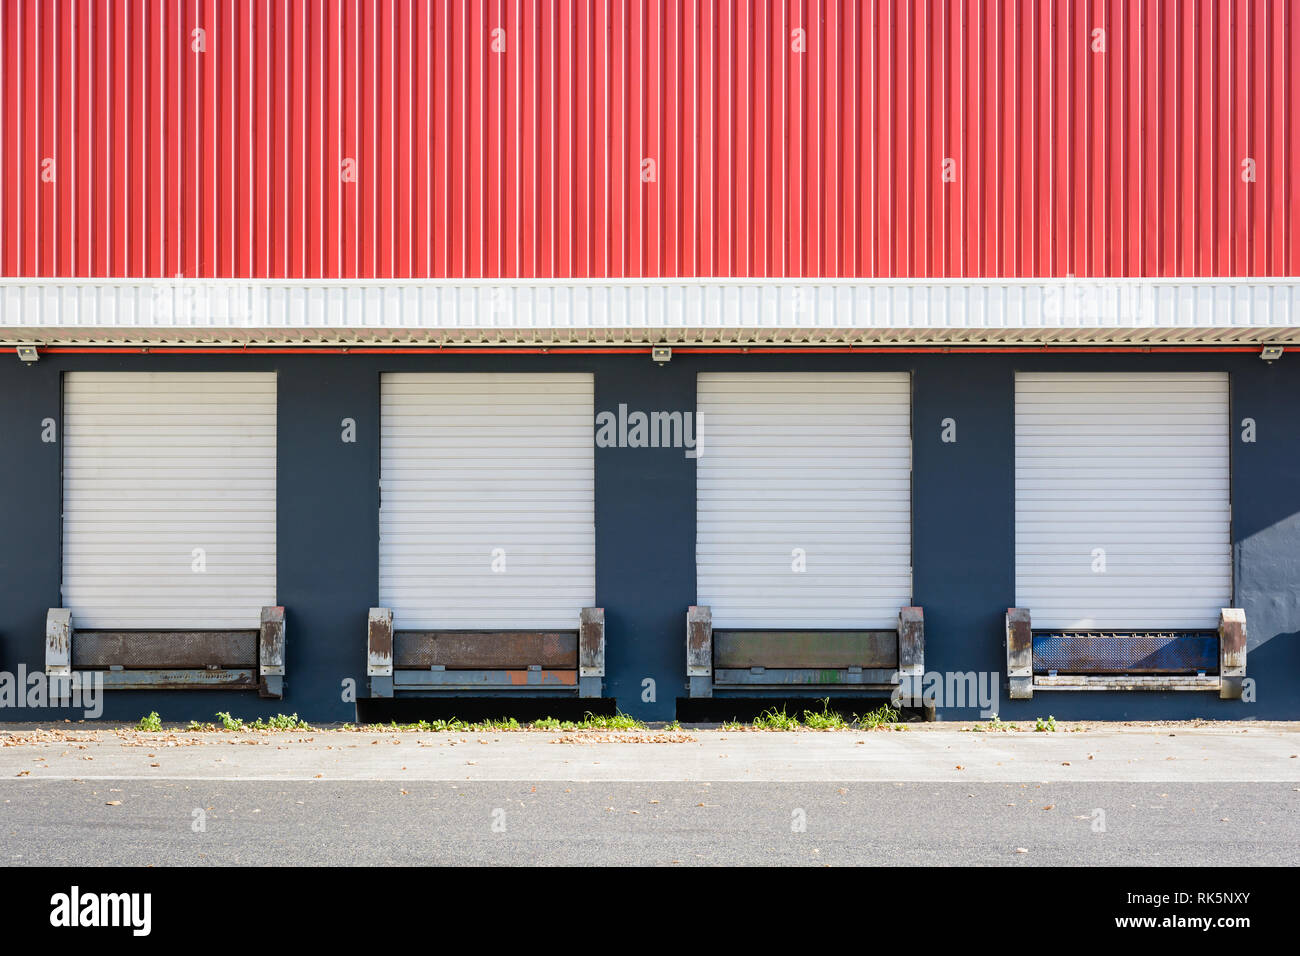 Front view of four truck loading docks at a warehouse with white roller shutter doors closed under a red corrugated iron siding. Stock Photo